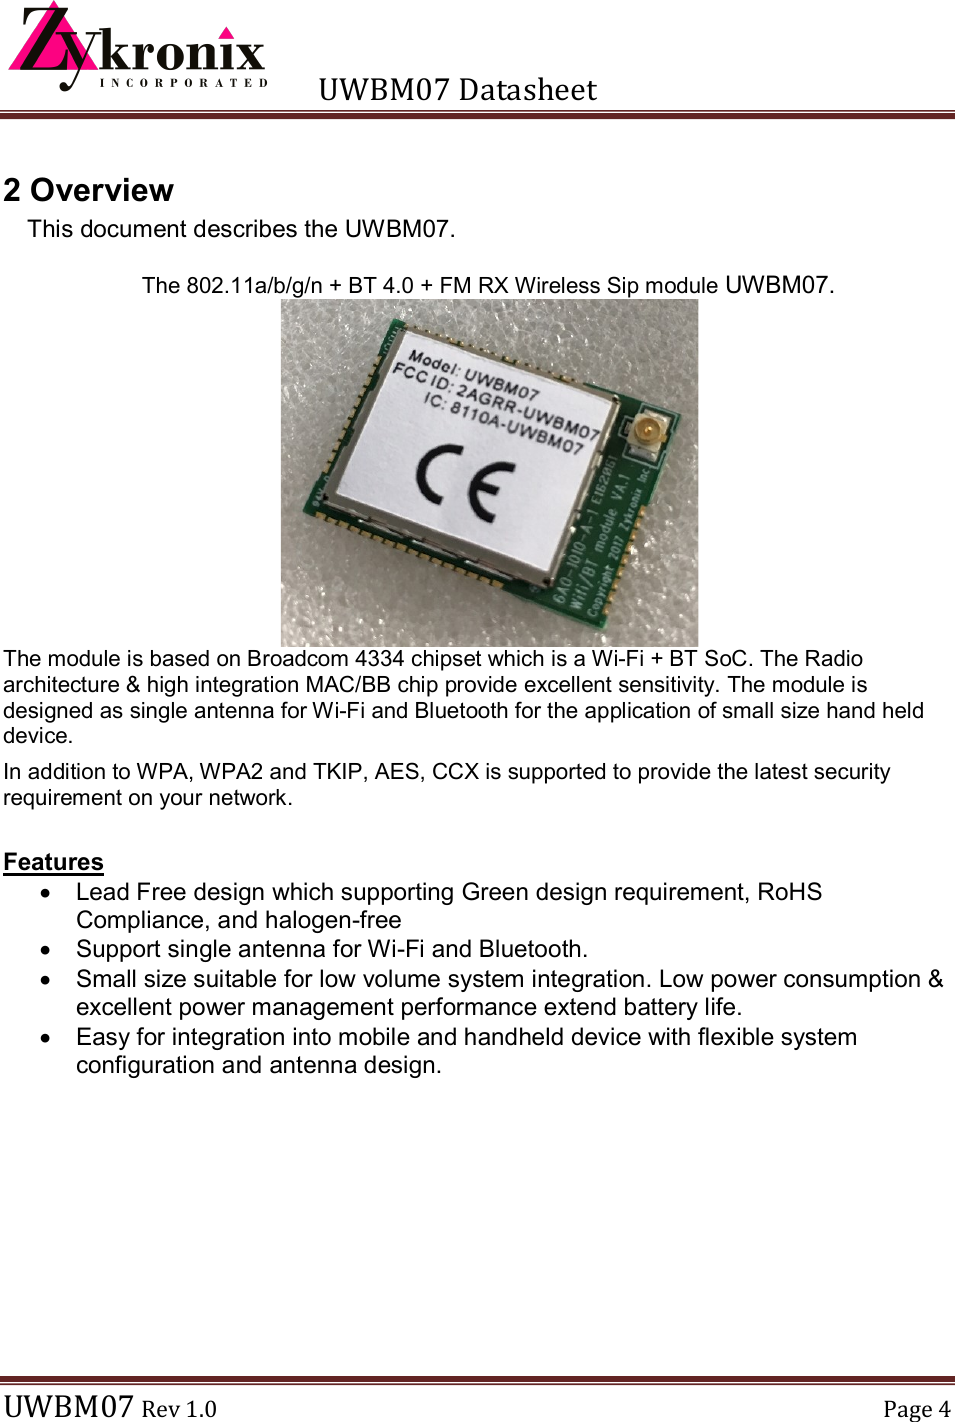      UWBM07 Datasheet  UWBM07 Rev 1.0  Page 4  2 Overview This document describes the UWBM07.  The 802.11a/b/g/n + BT 4.0 + FM RX Wireless Sip module UWBM07.  The module is based on Broadcom 4334 chipset which is a Wi-Fi + BT SoC. The Radio architecture &amp; high integration MAC/BB chip provide excellent sensitivity. The module is designed as single antenna for Wi-Fi and Bluetooth for the application of small size hand held device. In addition to WPA, WPA2 and TKIP, AES, CCX is supported to provide the latest security requirement on your network.  Features   Lead Free design which supporting Green design requirement, RoHS Compliance, and halogen-free   Support single antenna for Wi-Fi and Bluetooth.   Small size suitable for low volume system integration. Low power consumption &amp; excellent power management performance extend battery life.   Easy for integration into mobile and handheld device with flexible system configuration and antenna design.  